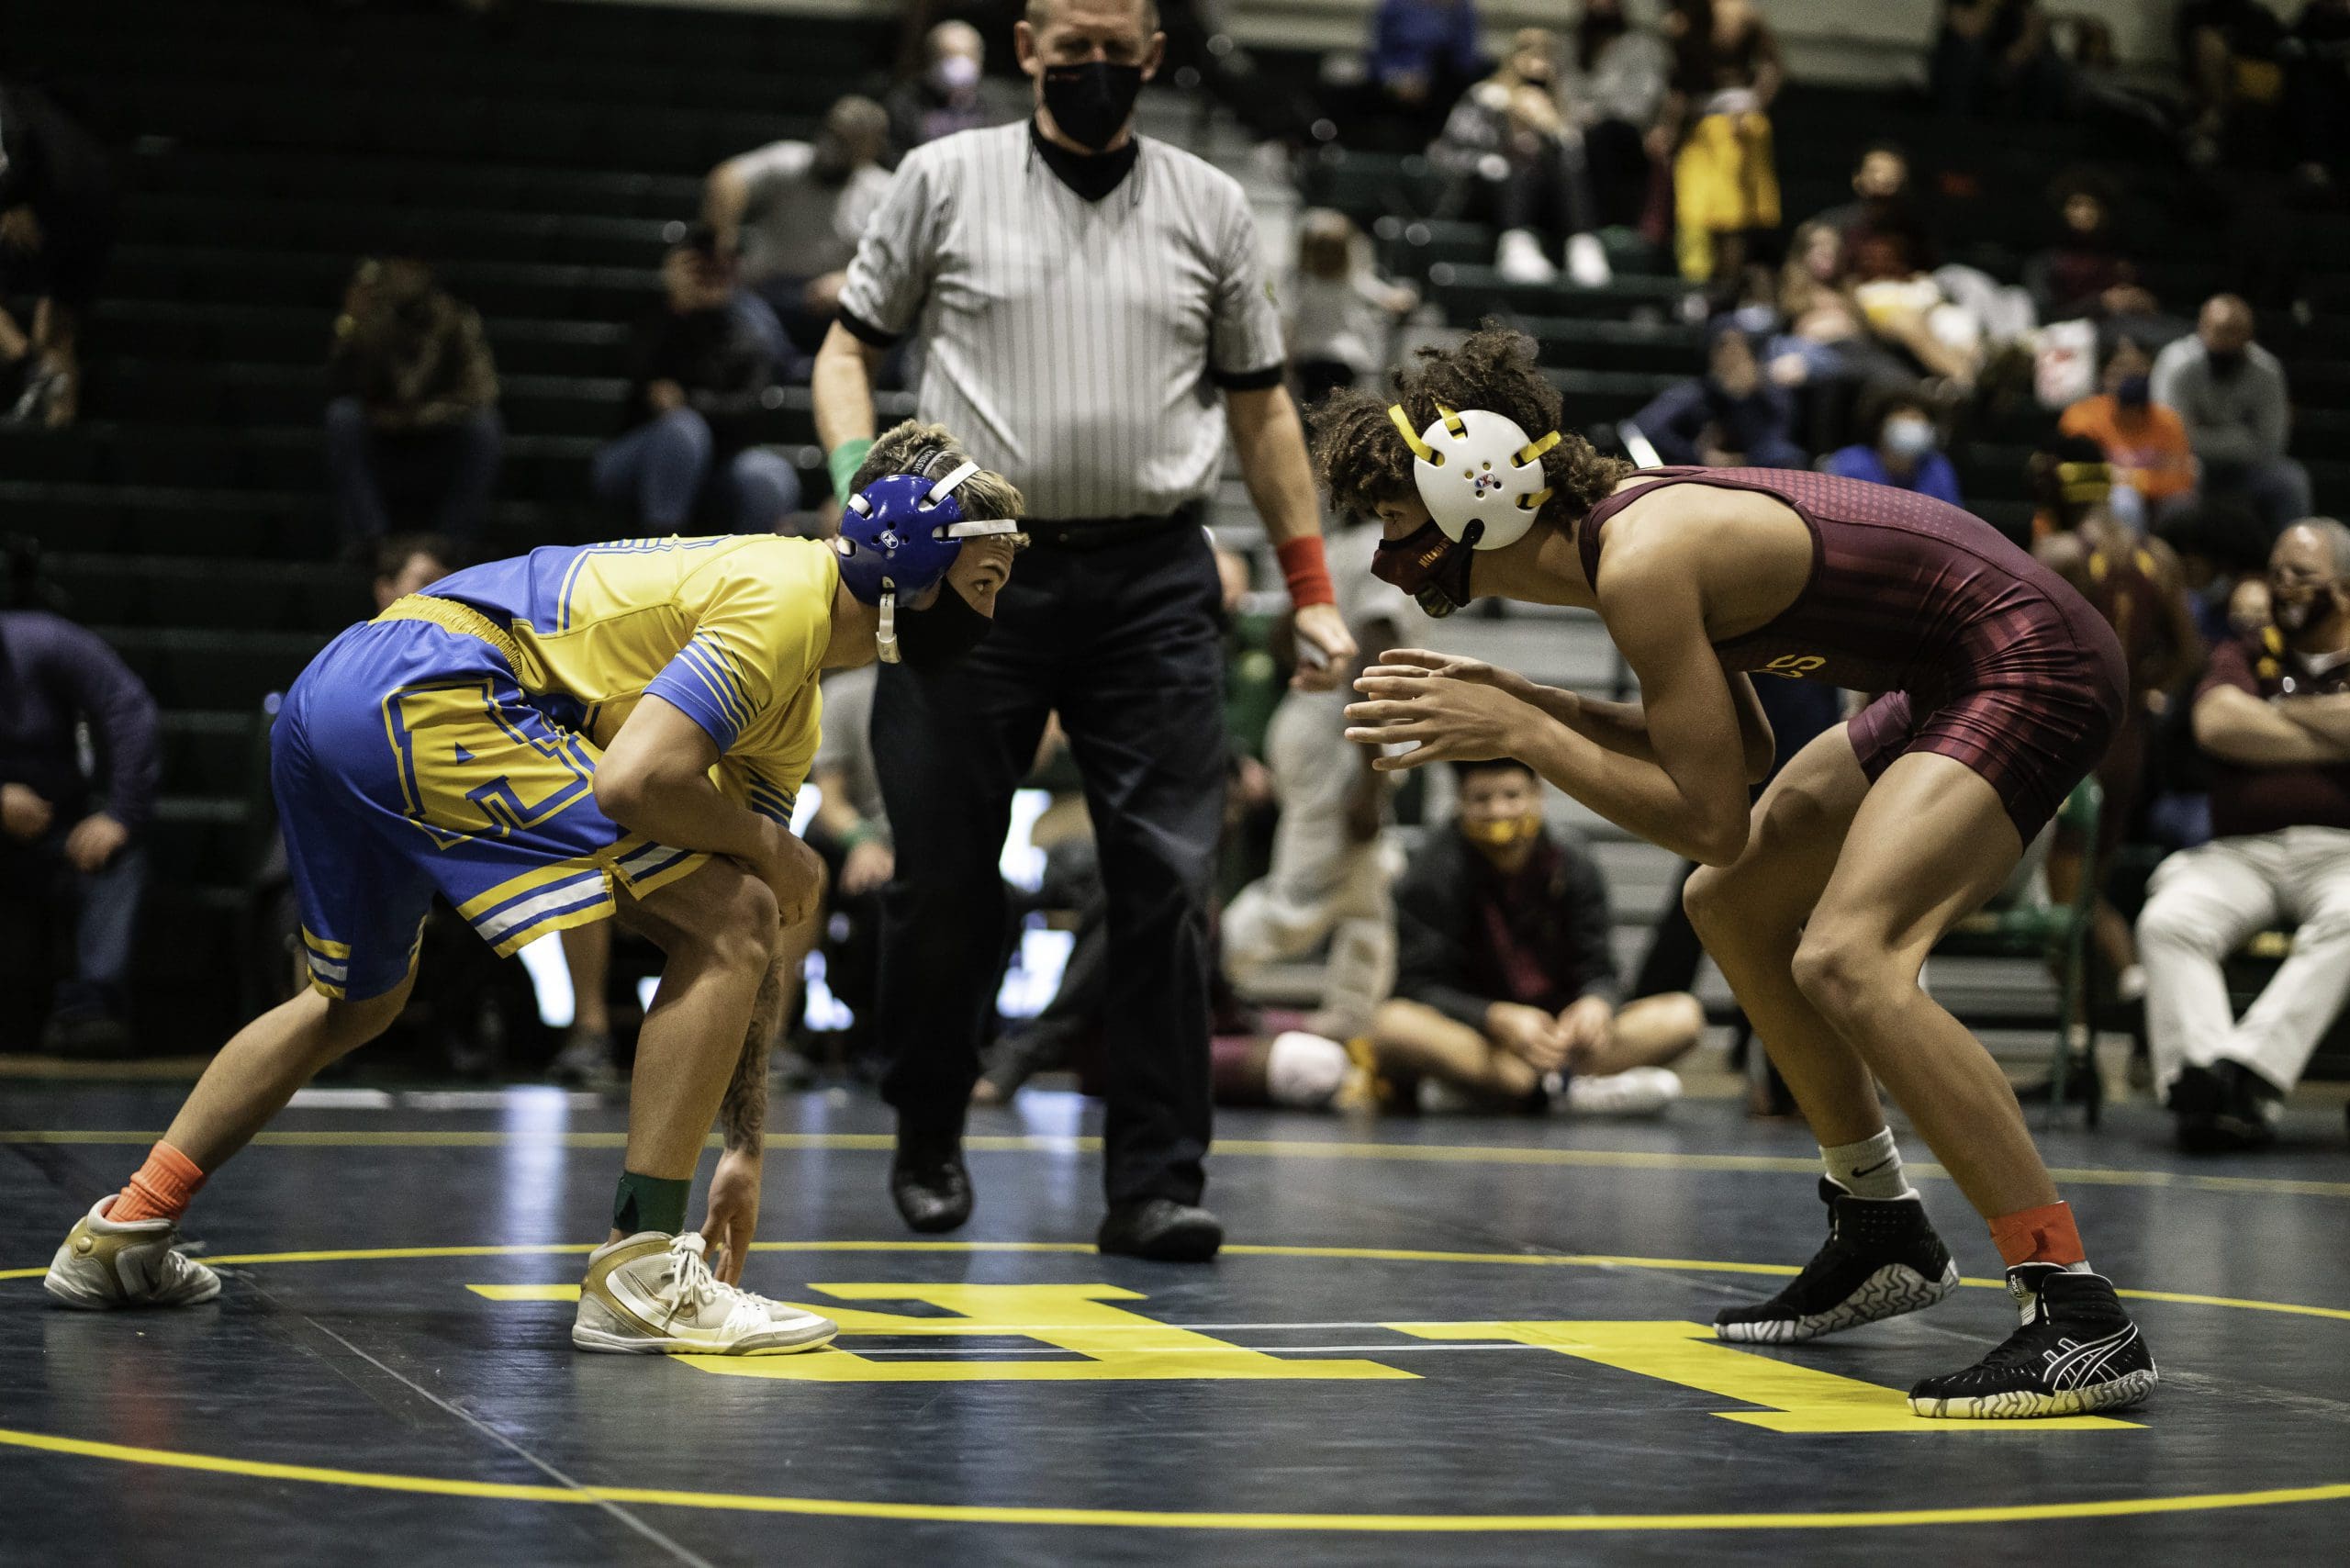 Featured image for “Caesar Rodney pins their way to mat victory over Milford”